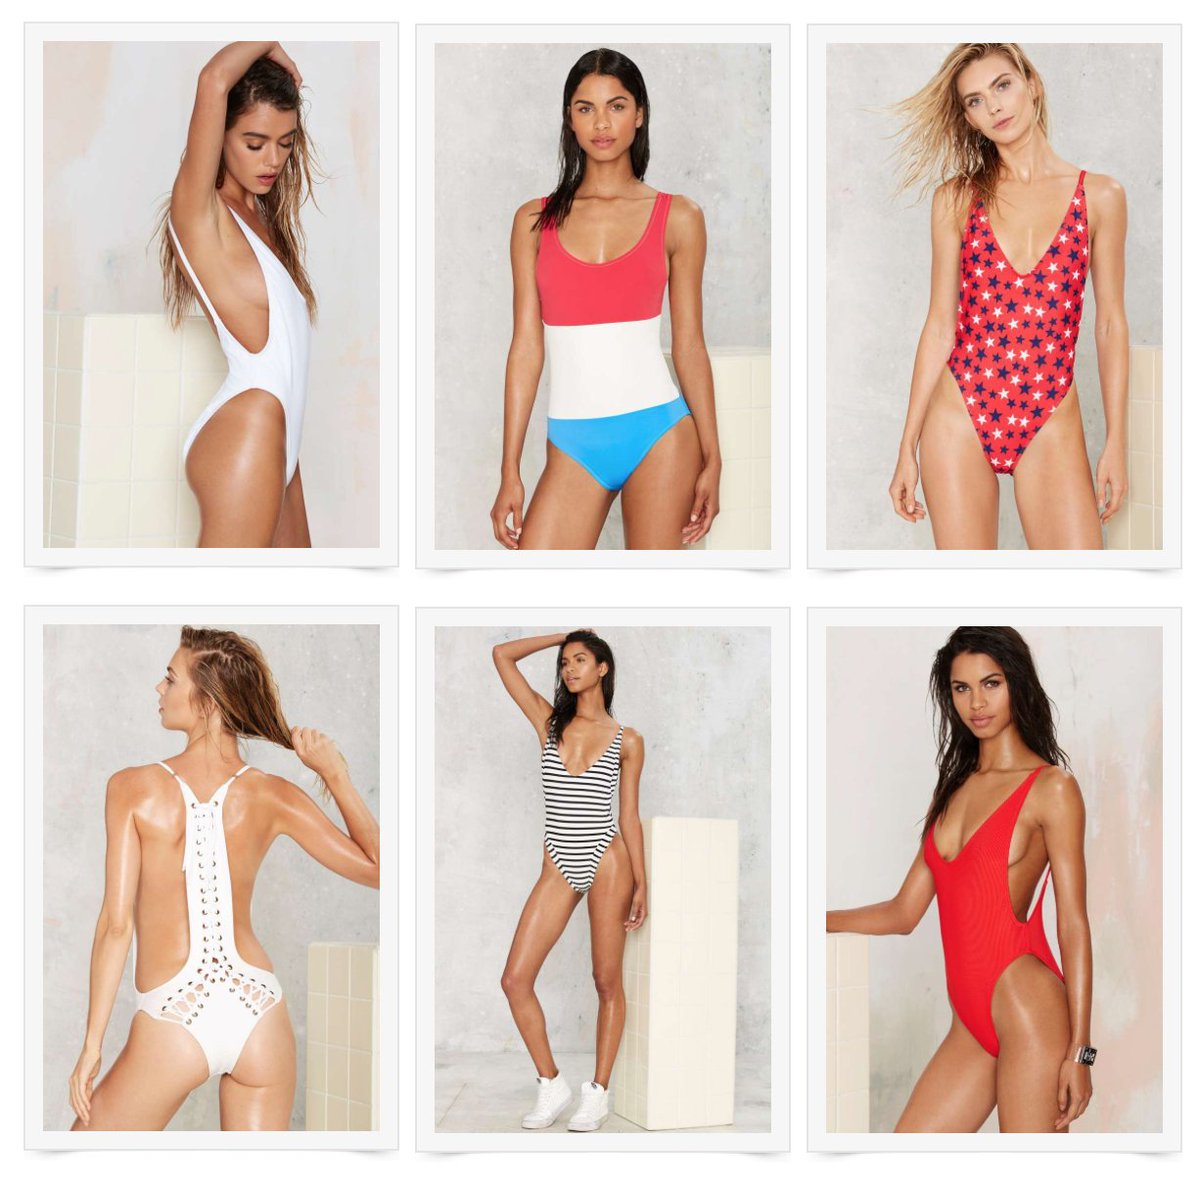 RT @ABikiniADay: Your 4th of July suits are all here for you to pick from: https://t.co/JRjLIaOqlH https://t.co/GGEGiEM26w